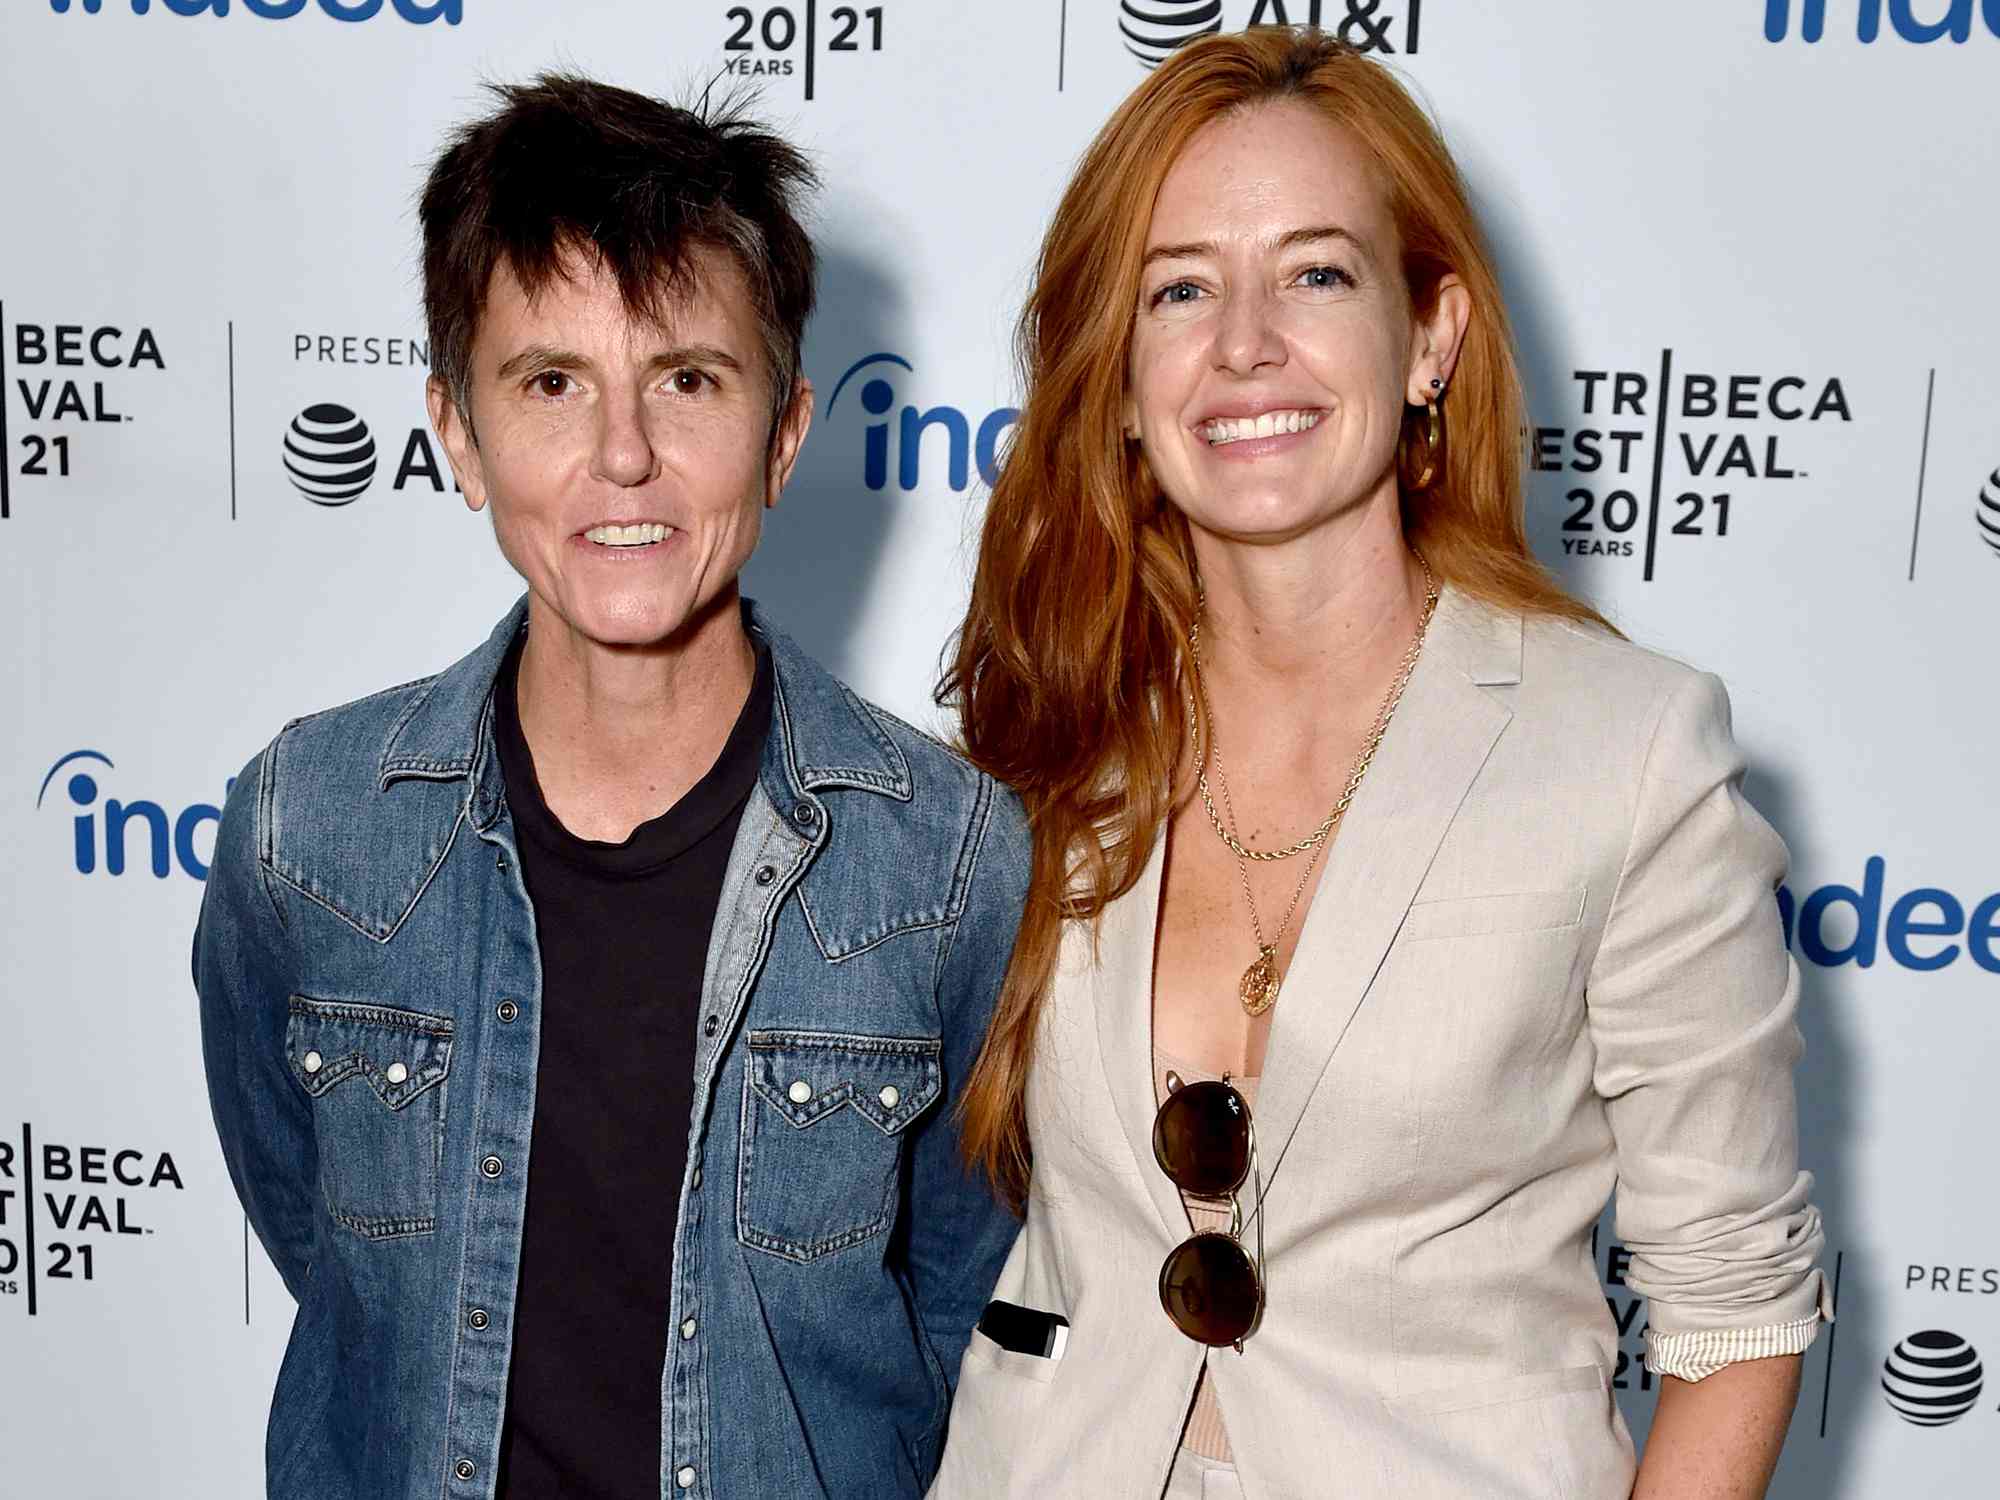 Tig Notaro and Stephanie Allynne at the Tribeca Festival After-Party for Rising Voices on June 16, 2021 in New York City. 